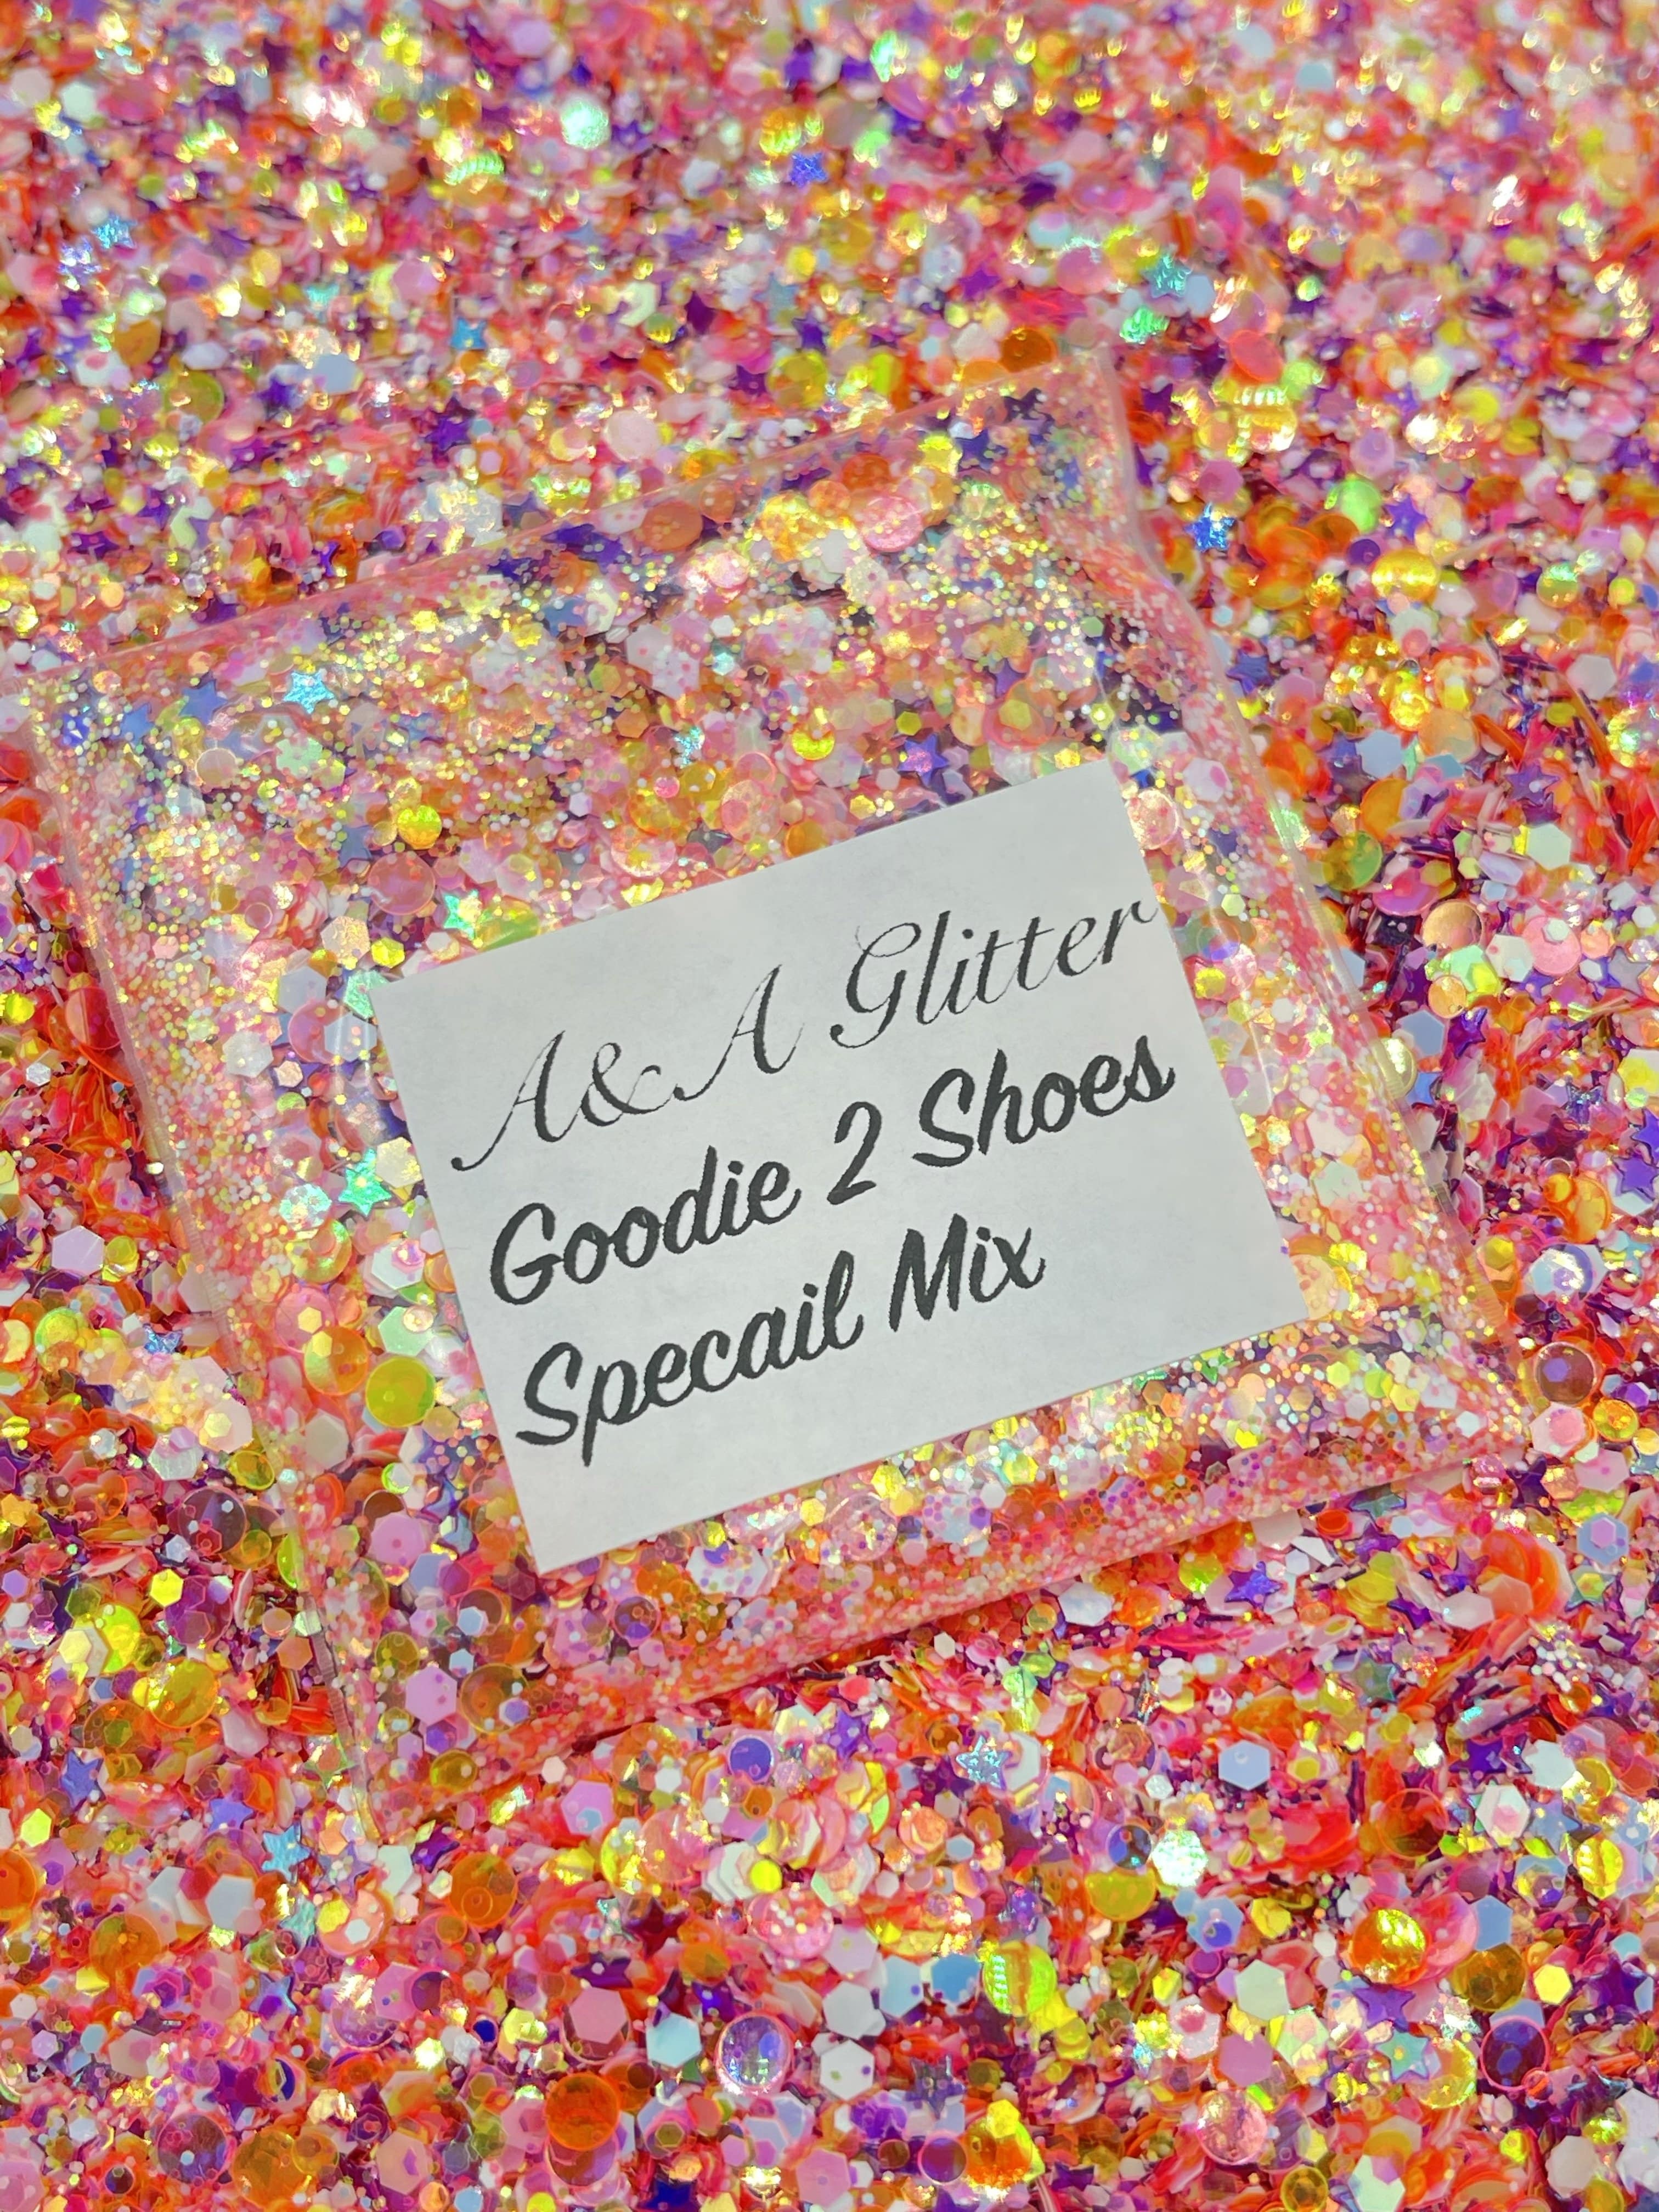 Goodie 2 Shoes - Special Mix